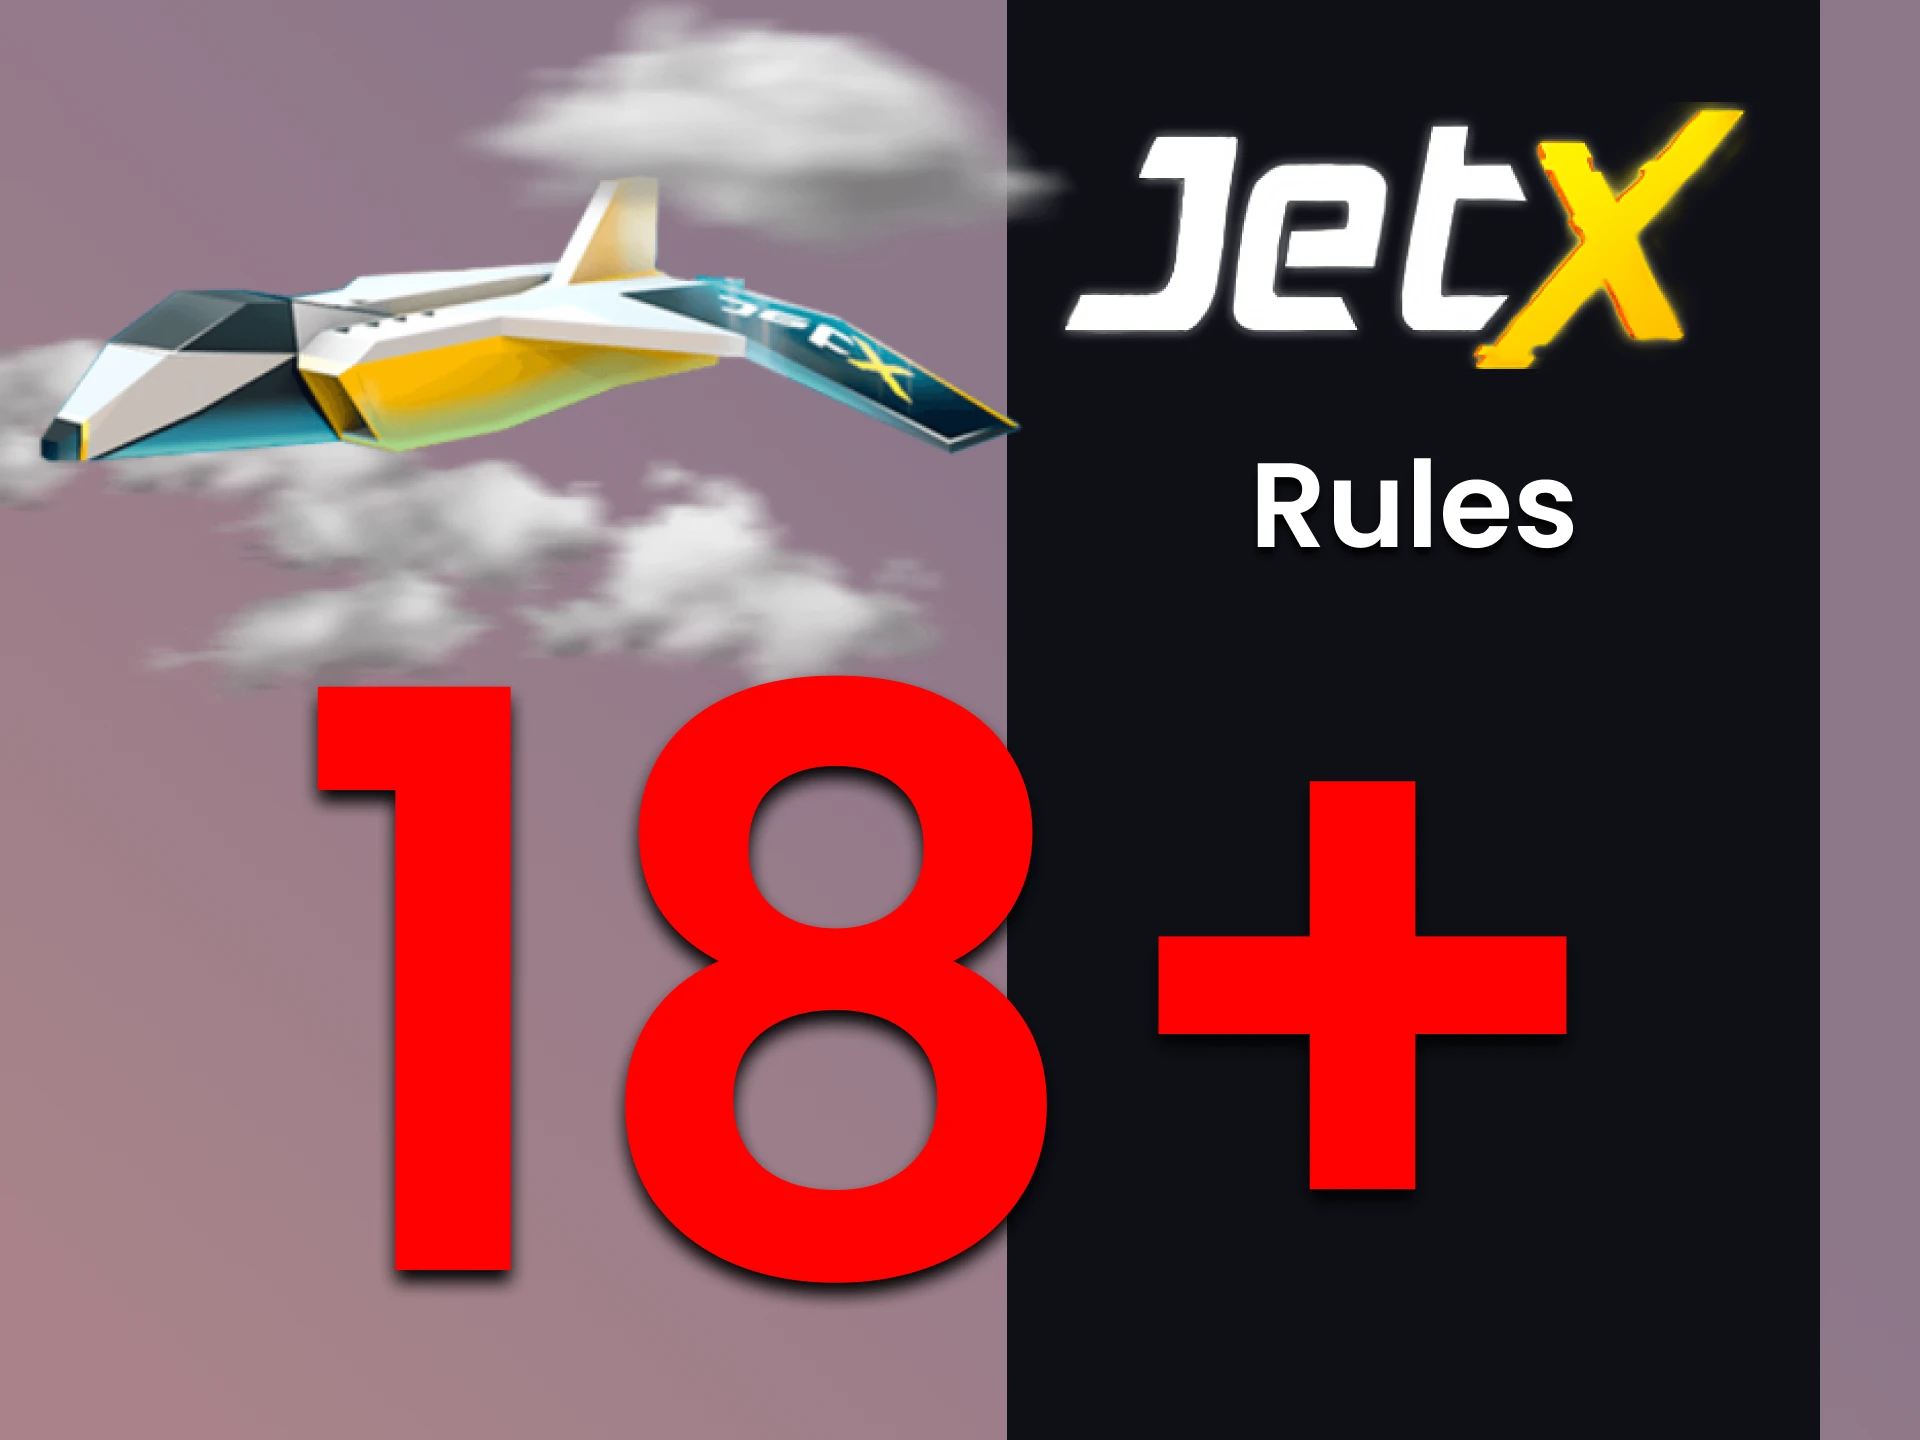 Learn the withdrawal rules for the JetX game.